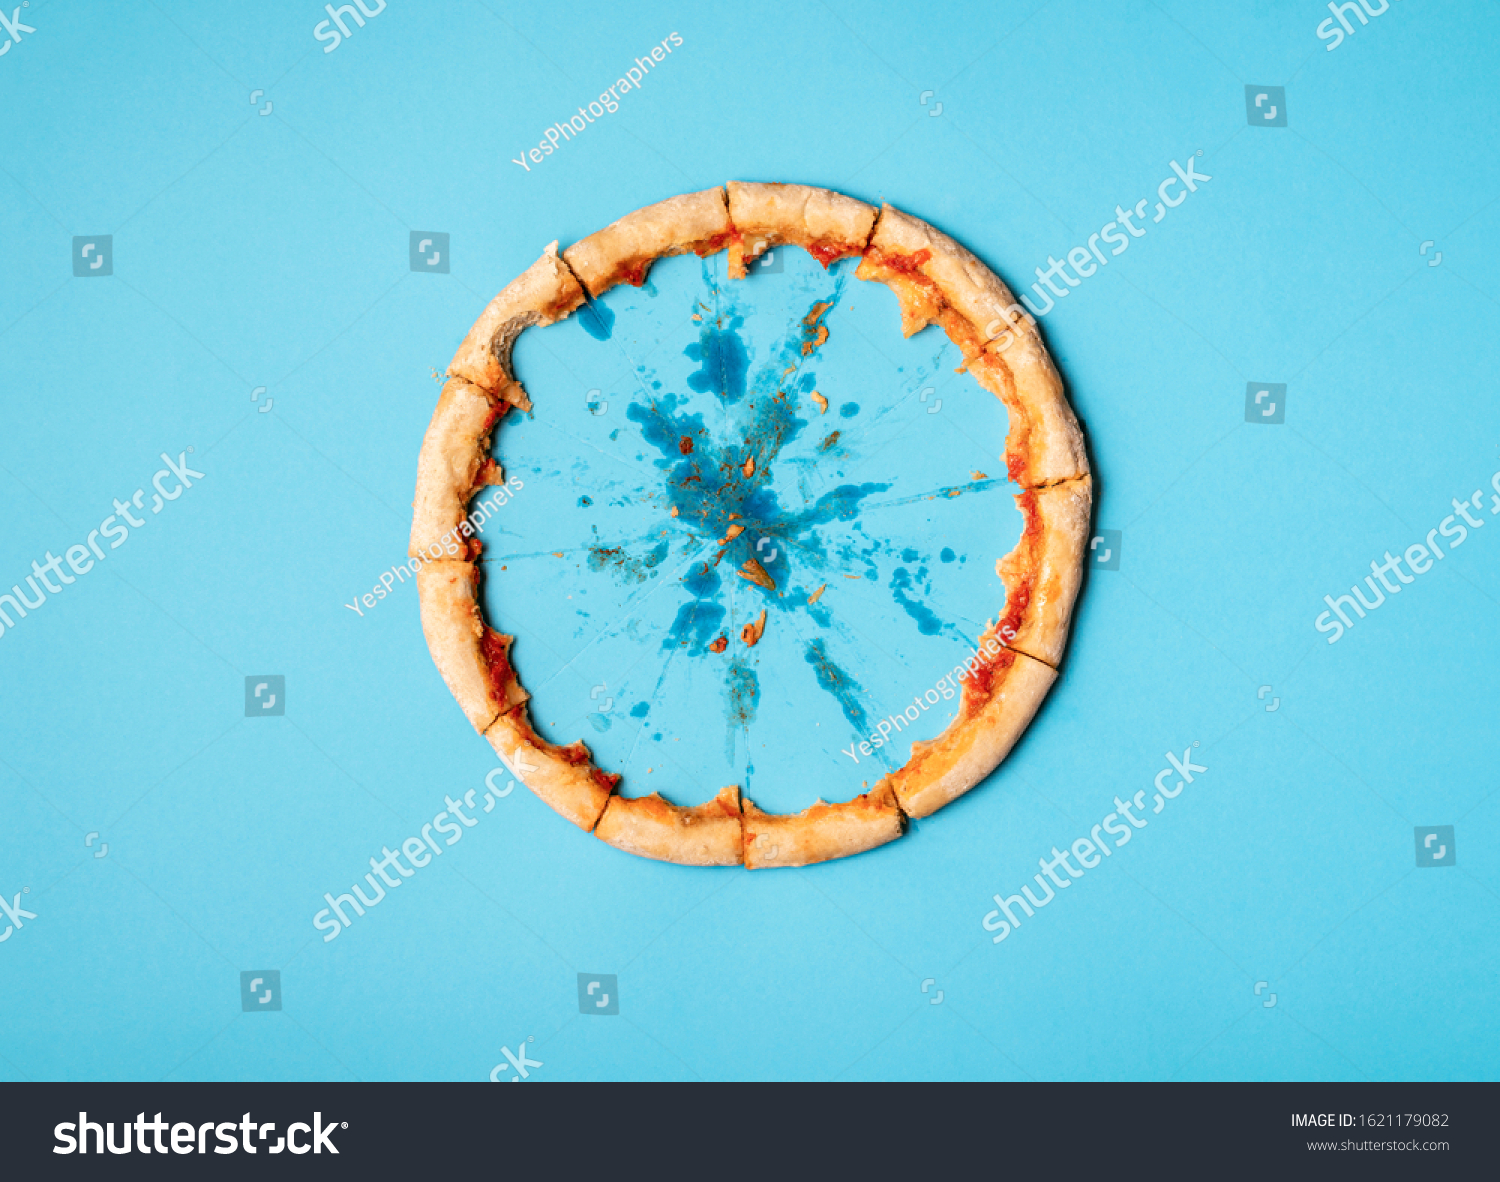 Pizza crust in a circle on blue background and grease traces. Flat lay of just pizza crust and crumbs. Eaten pizza context. Diet pizza funny concept. #1621179082